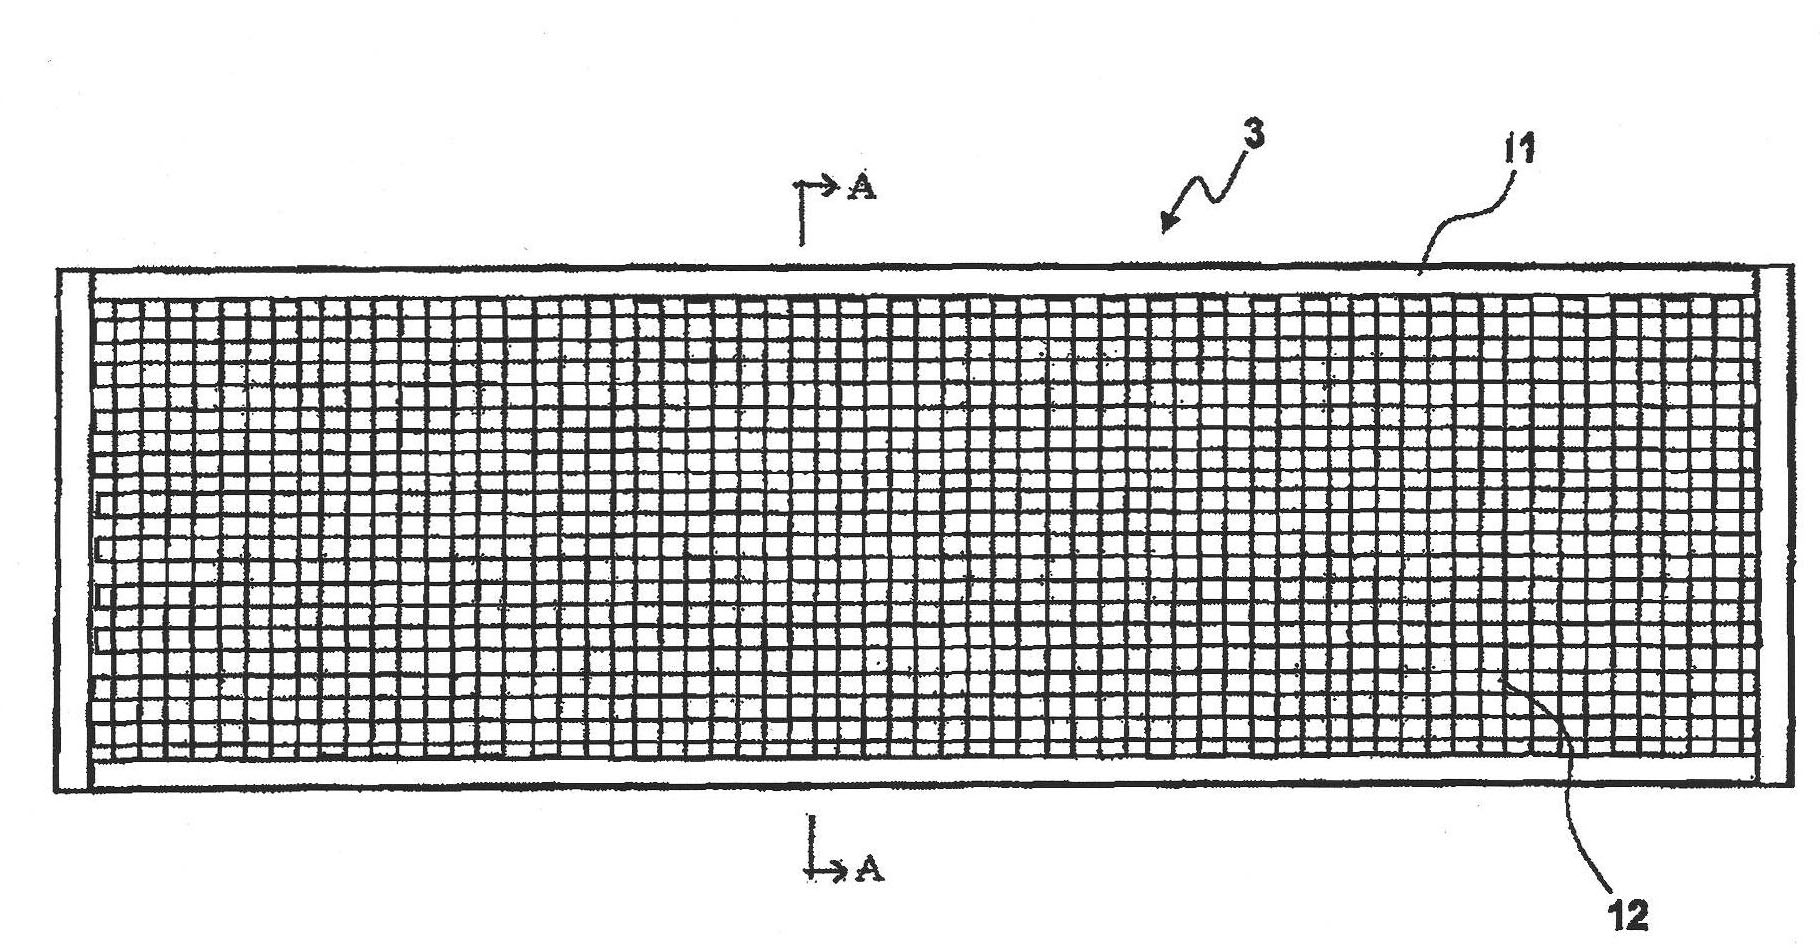 Acoustic shielding device for damping of disturbing traffic noise